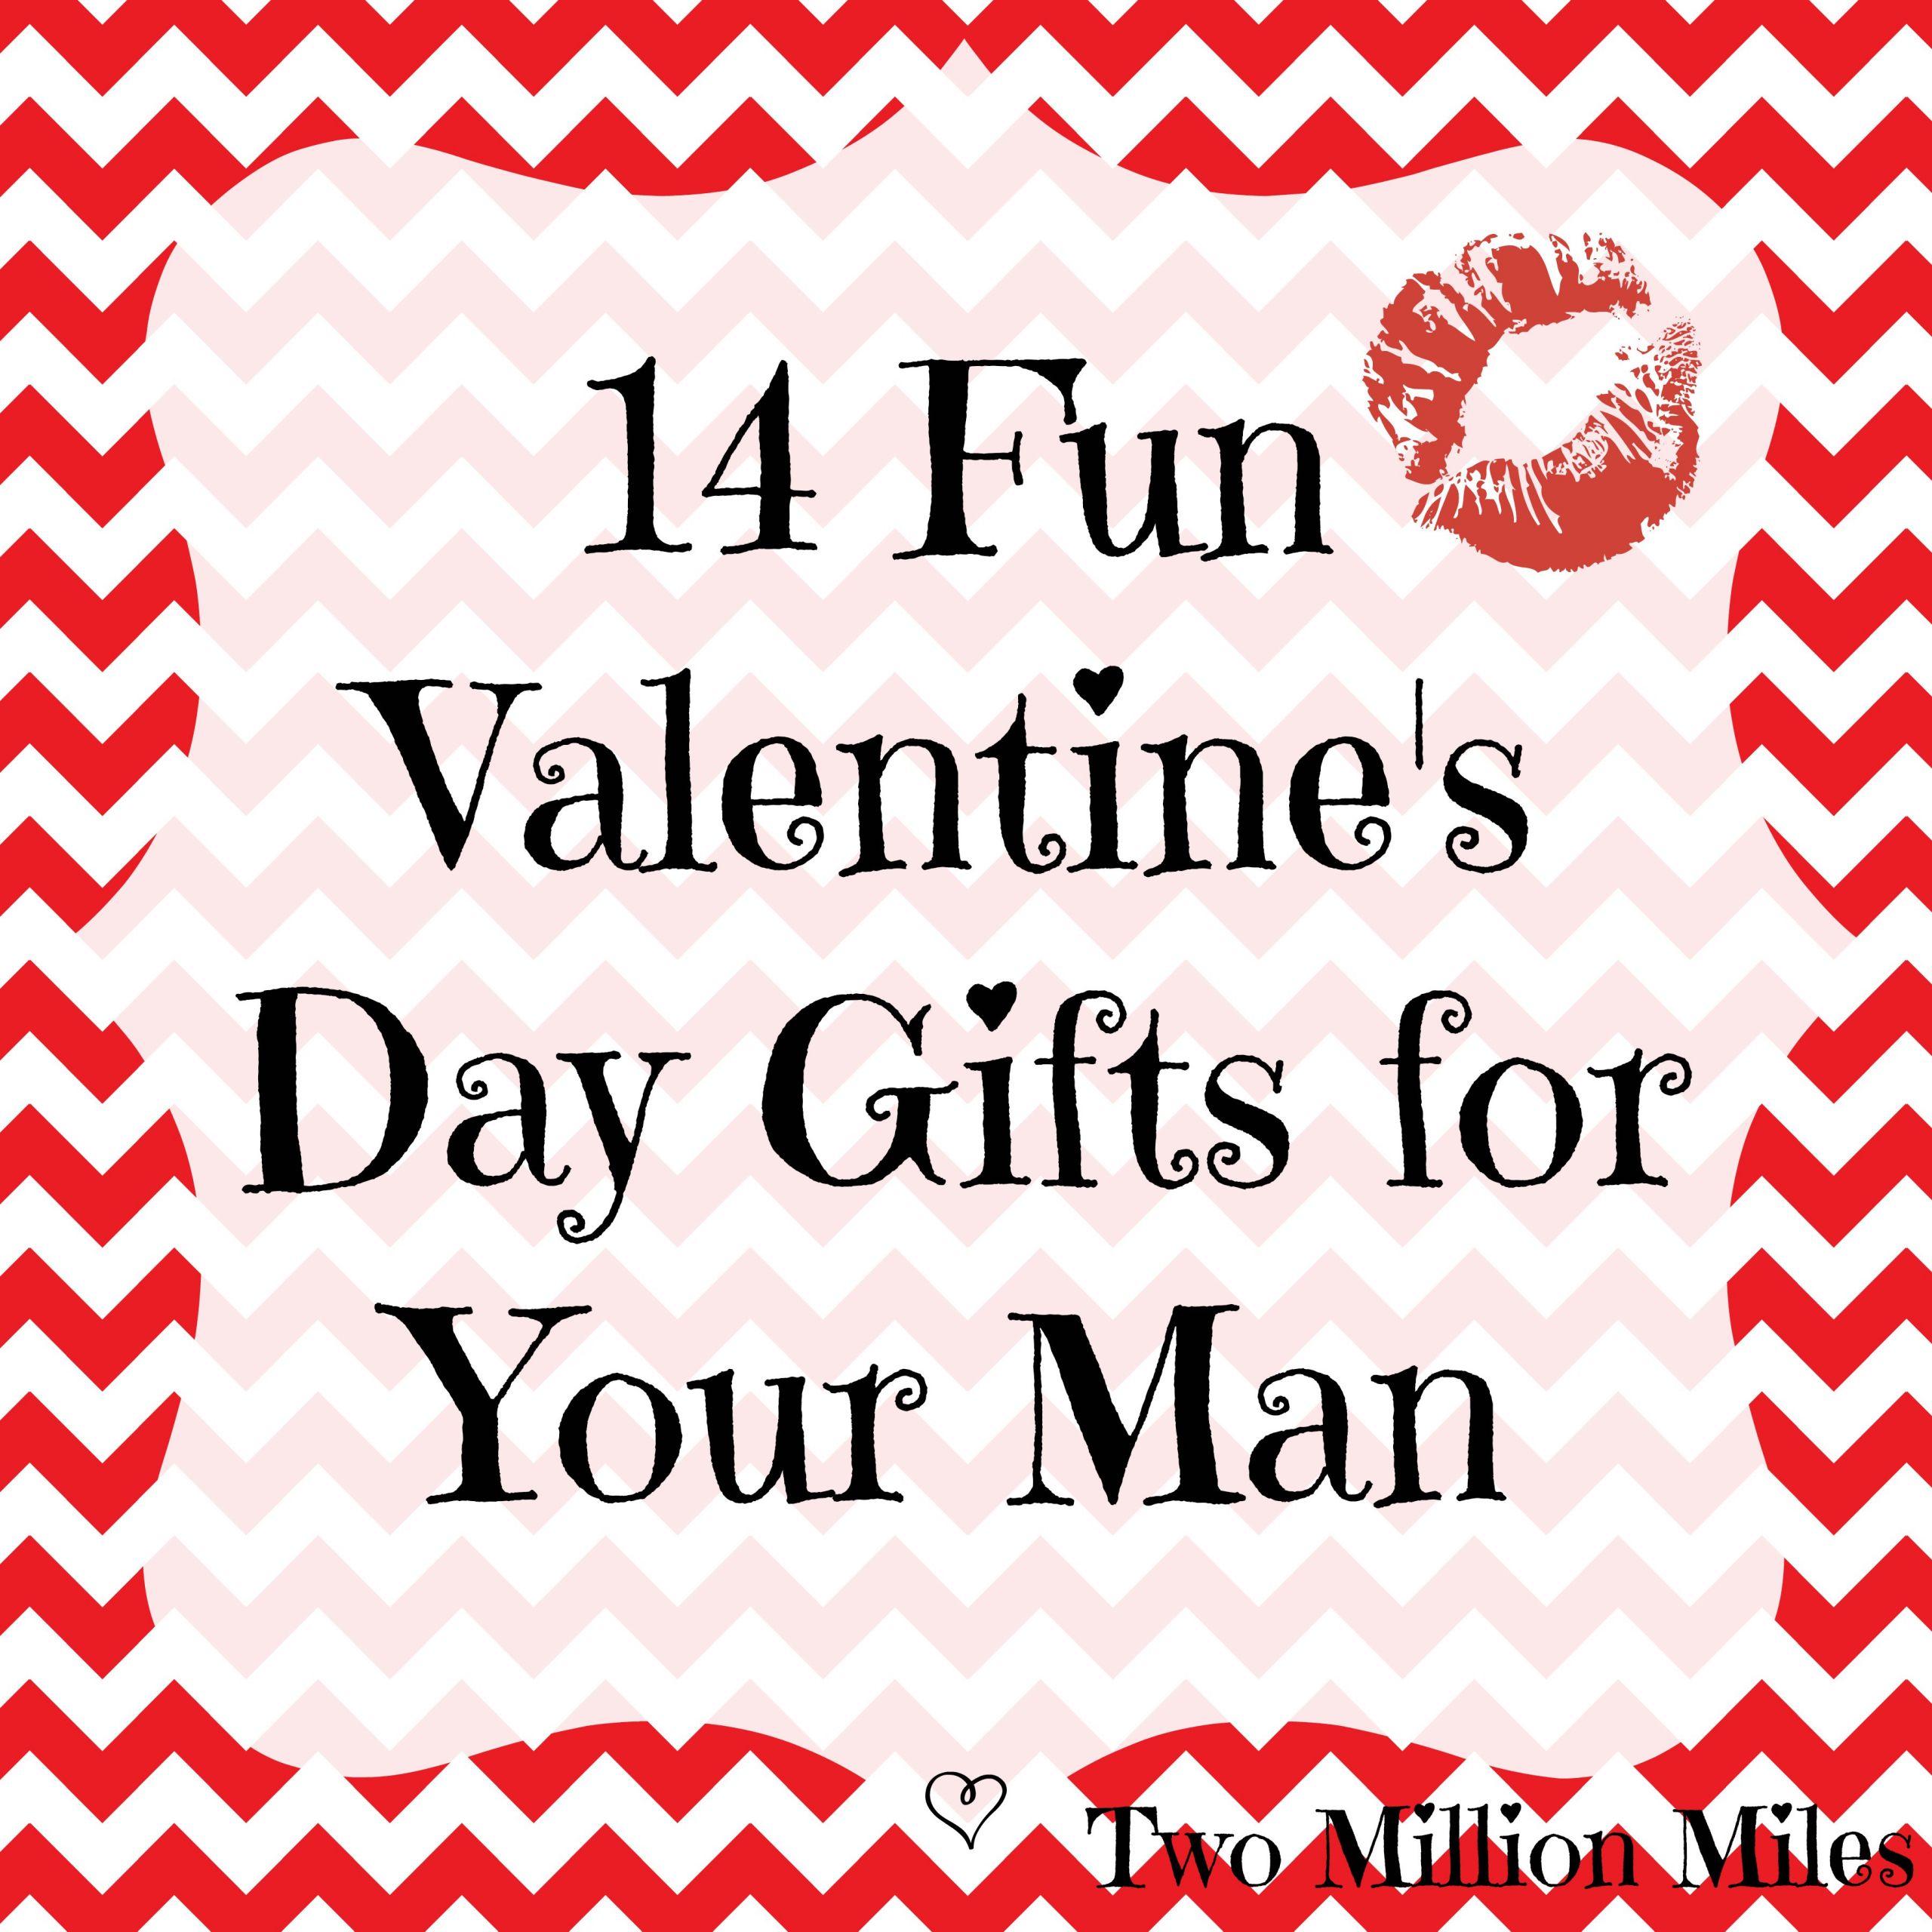 Funny Valentines Day Gifts
 14 Valentine’s Day Gifts for Your Man